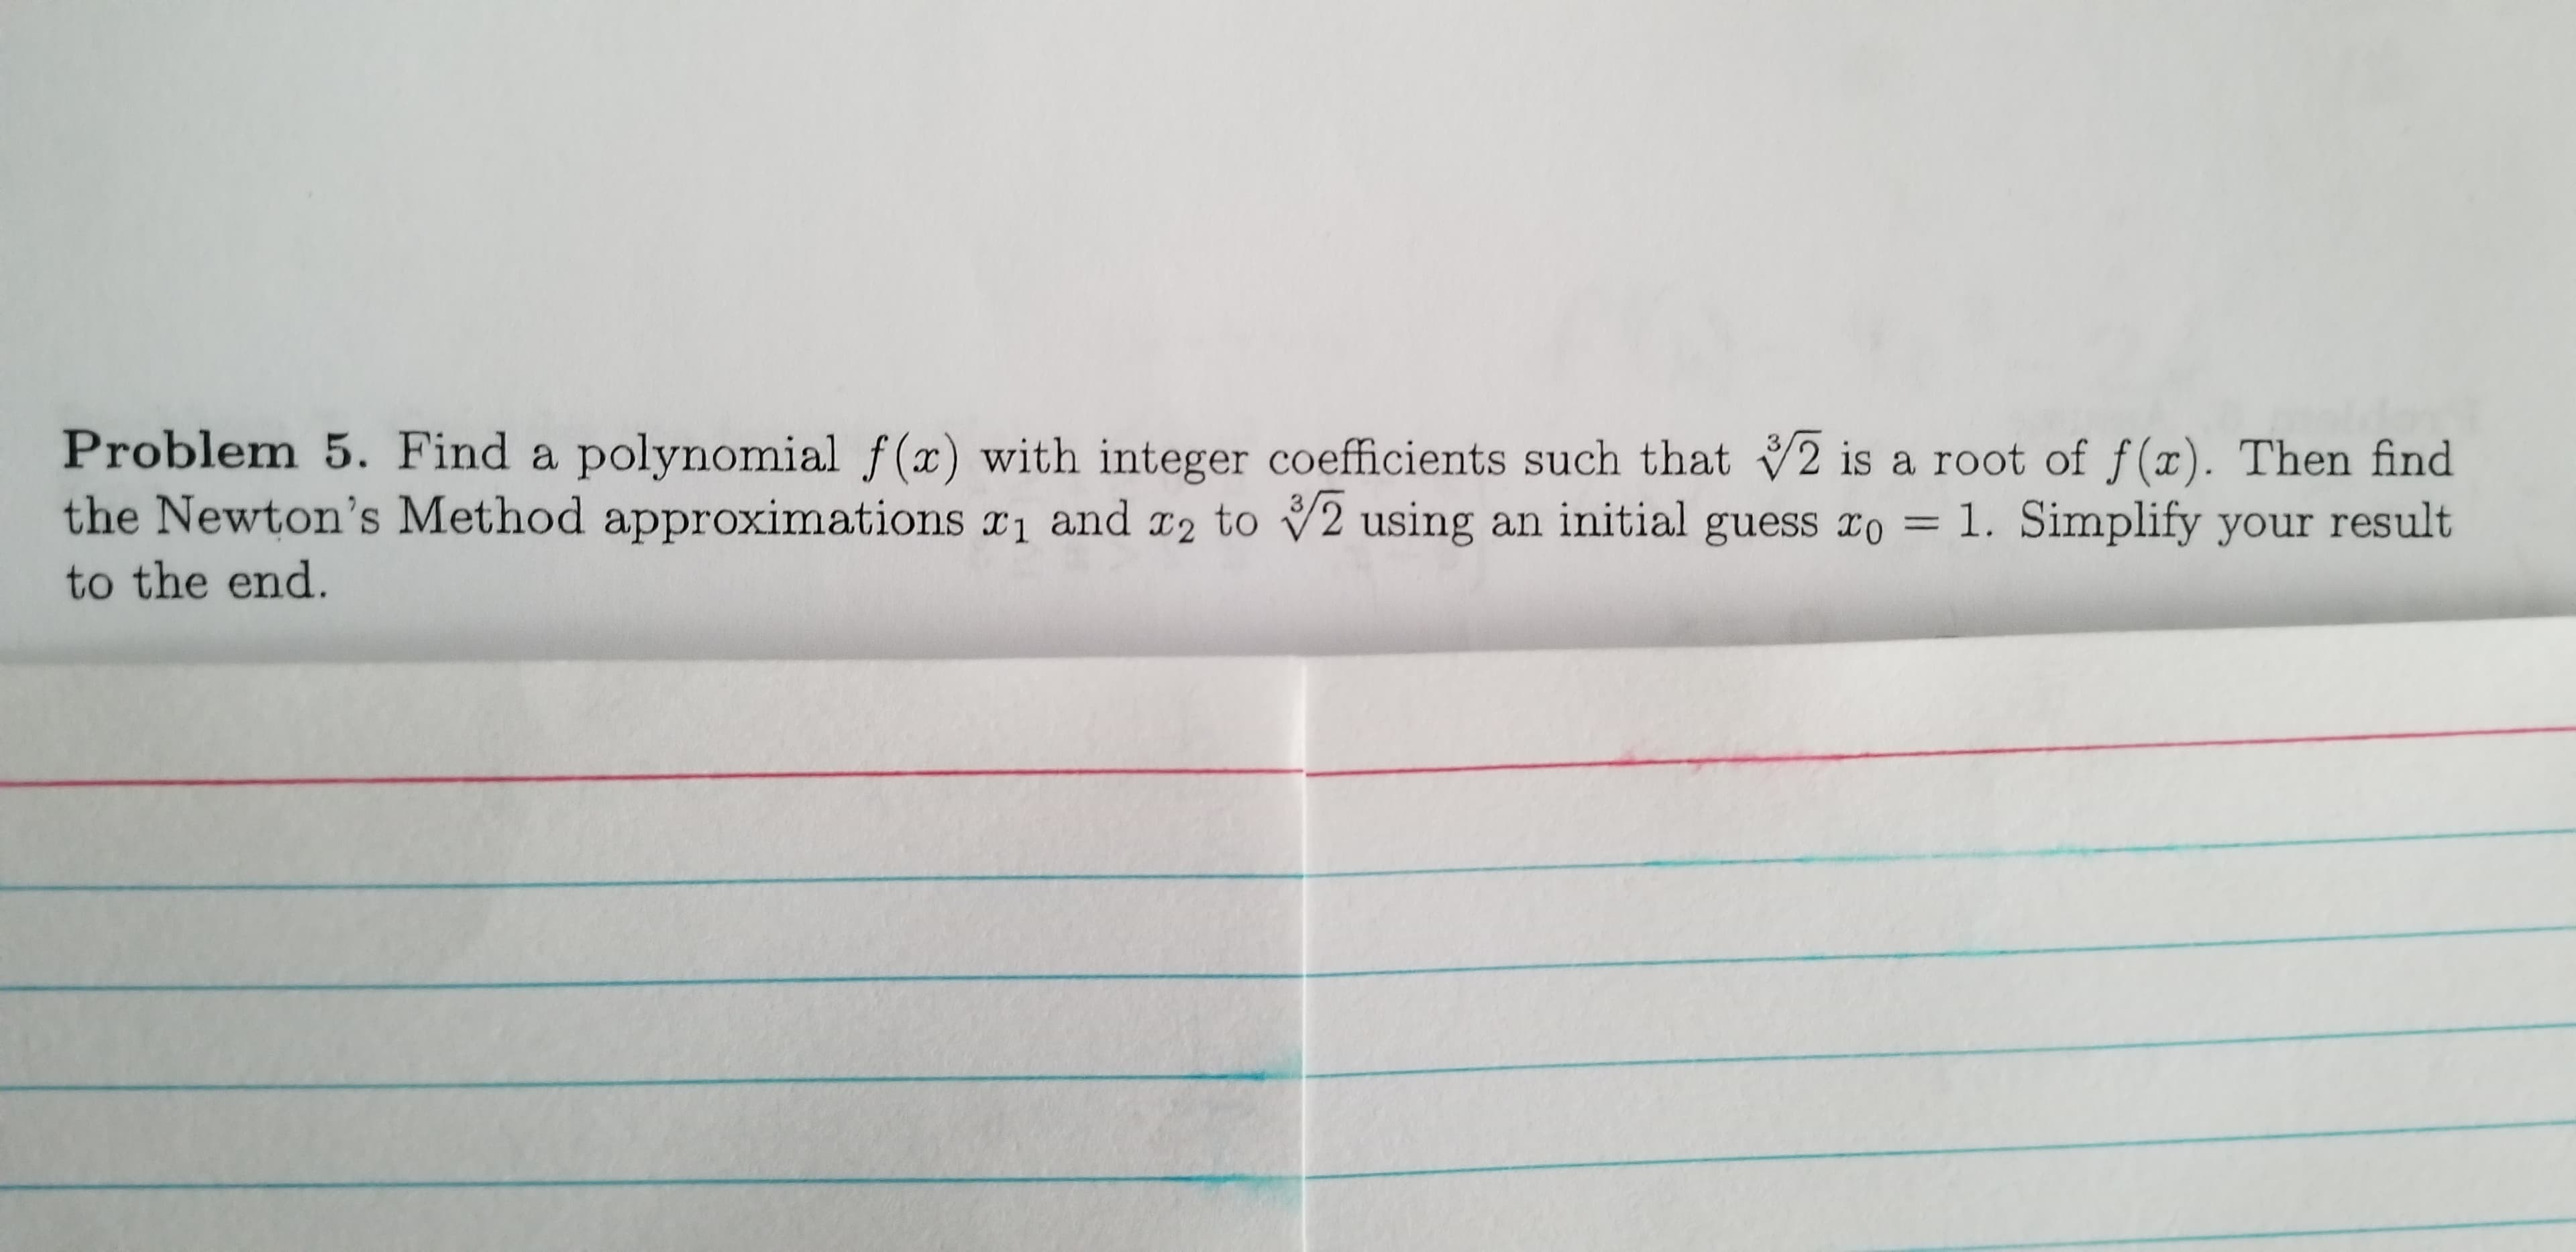 Problem 5. Find a polynomial f(x) with integer coefficients such that 2 is a root of f(x). Then find
the Newton's Method approximations r1 and a2 to V2 using an initial guess ro = 1. Simplify your result
to the end.
